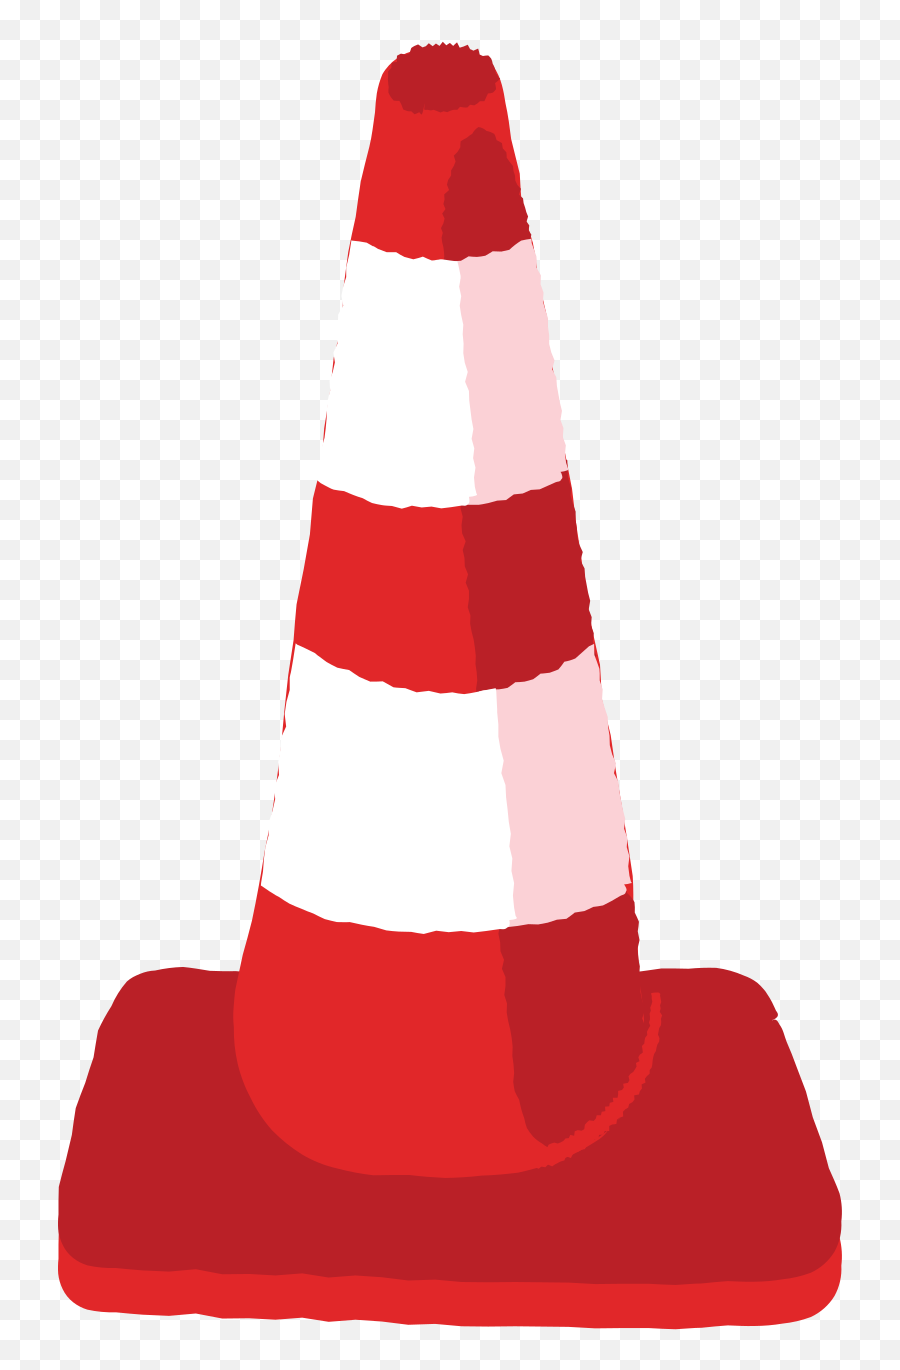 Traffic Signal Clipart Illustrations U0026 Images In Png And Svg Emoji,Construction Cone Clipart